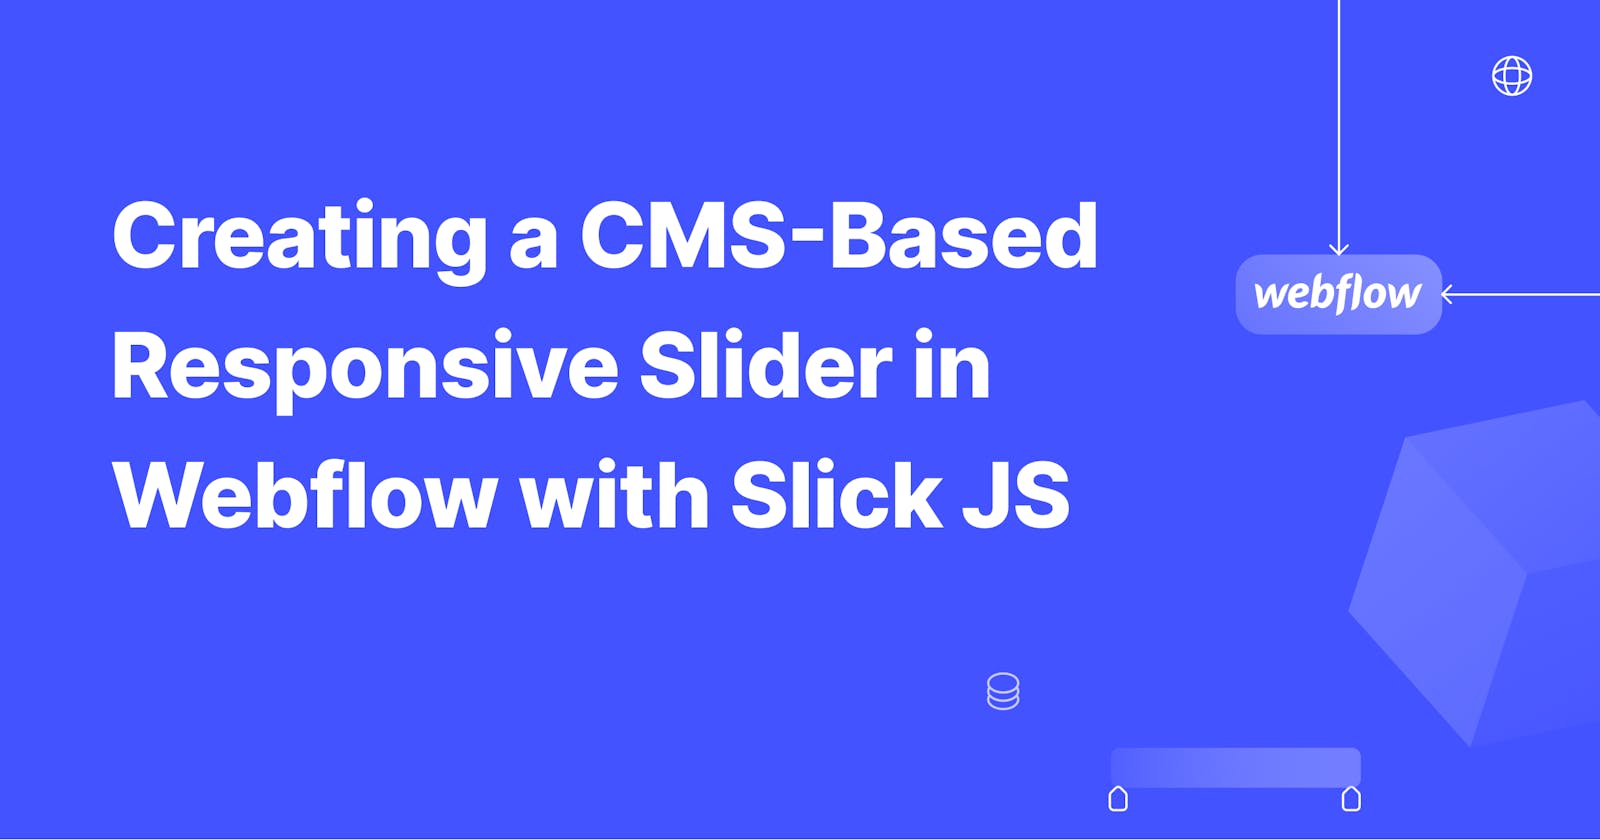 How to Create a Responsive Slider in Webflow Using Slick JS with CMS Integration